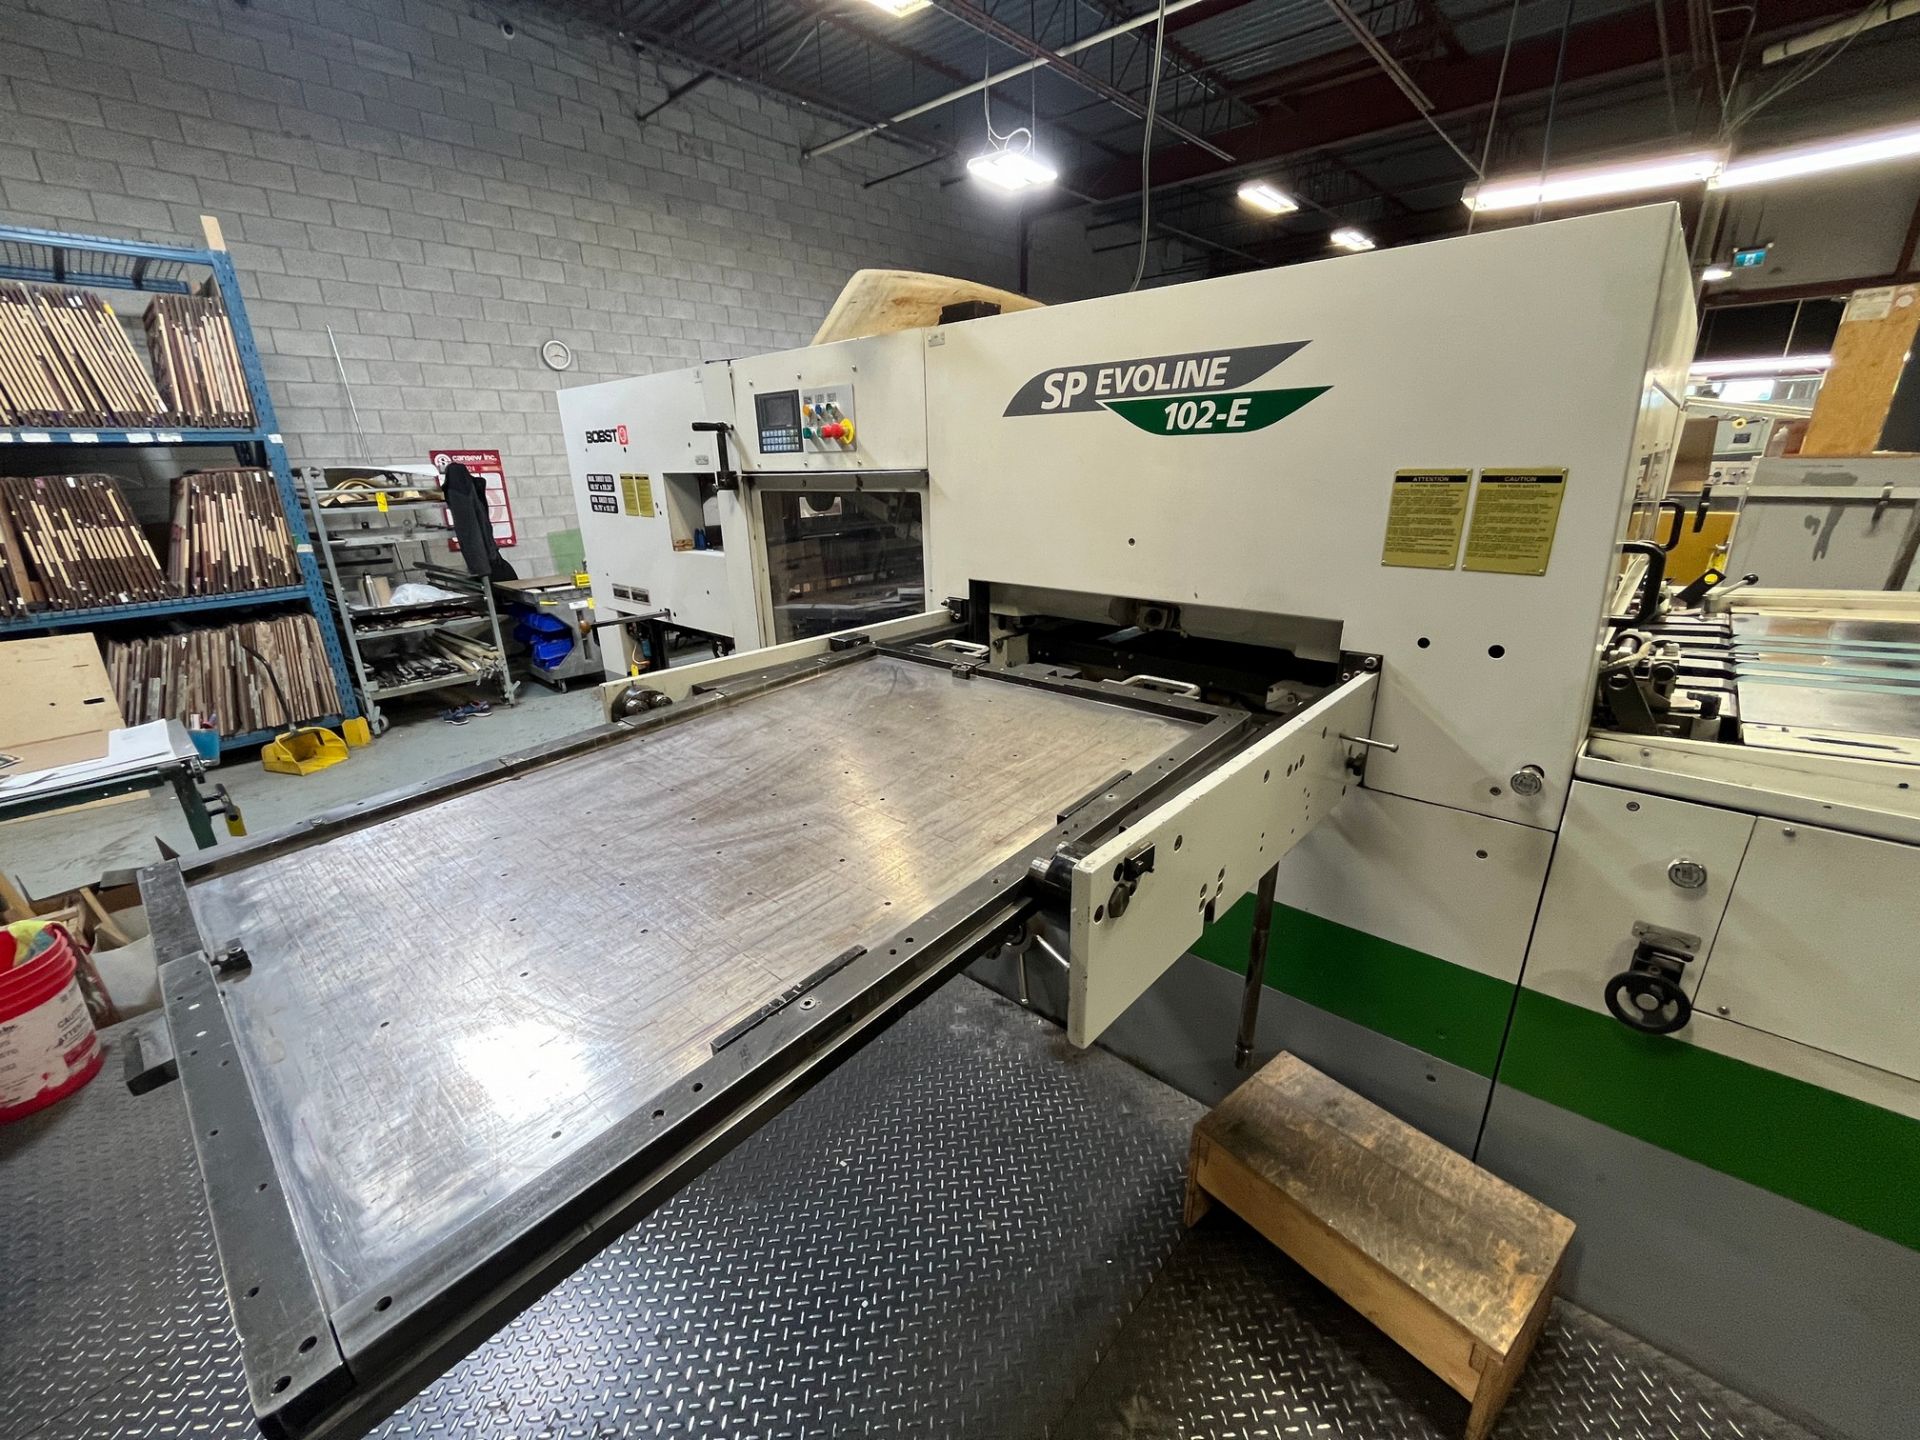 2004 BOBST AUTOPLATEN SP EVOLINE 102-E FLATBED DIE CUTTER WITH 40.15” X 28.34” CAP. MAX SHEET - Image 9 of 15